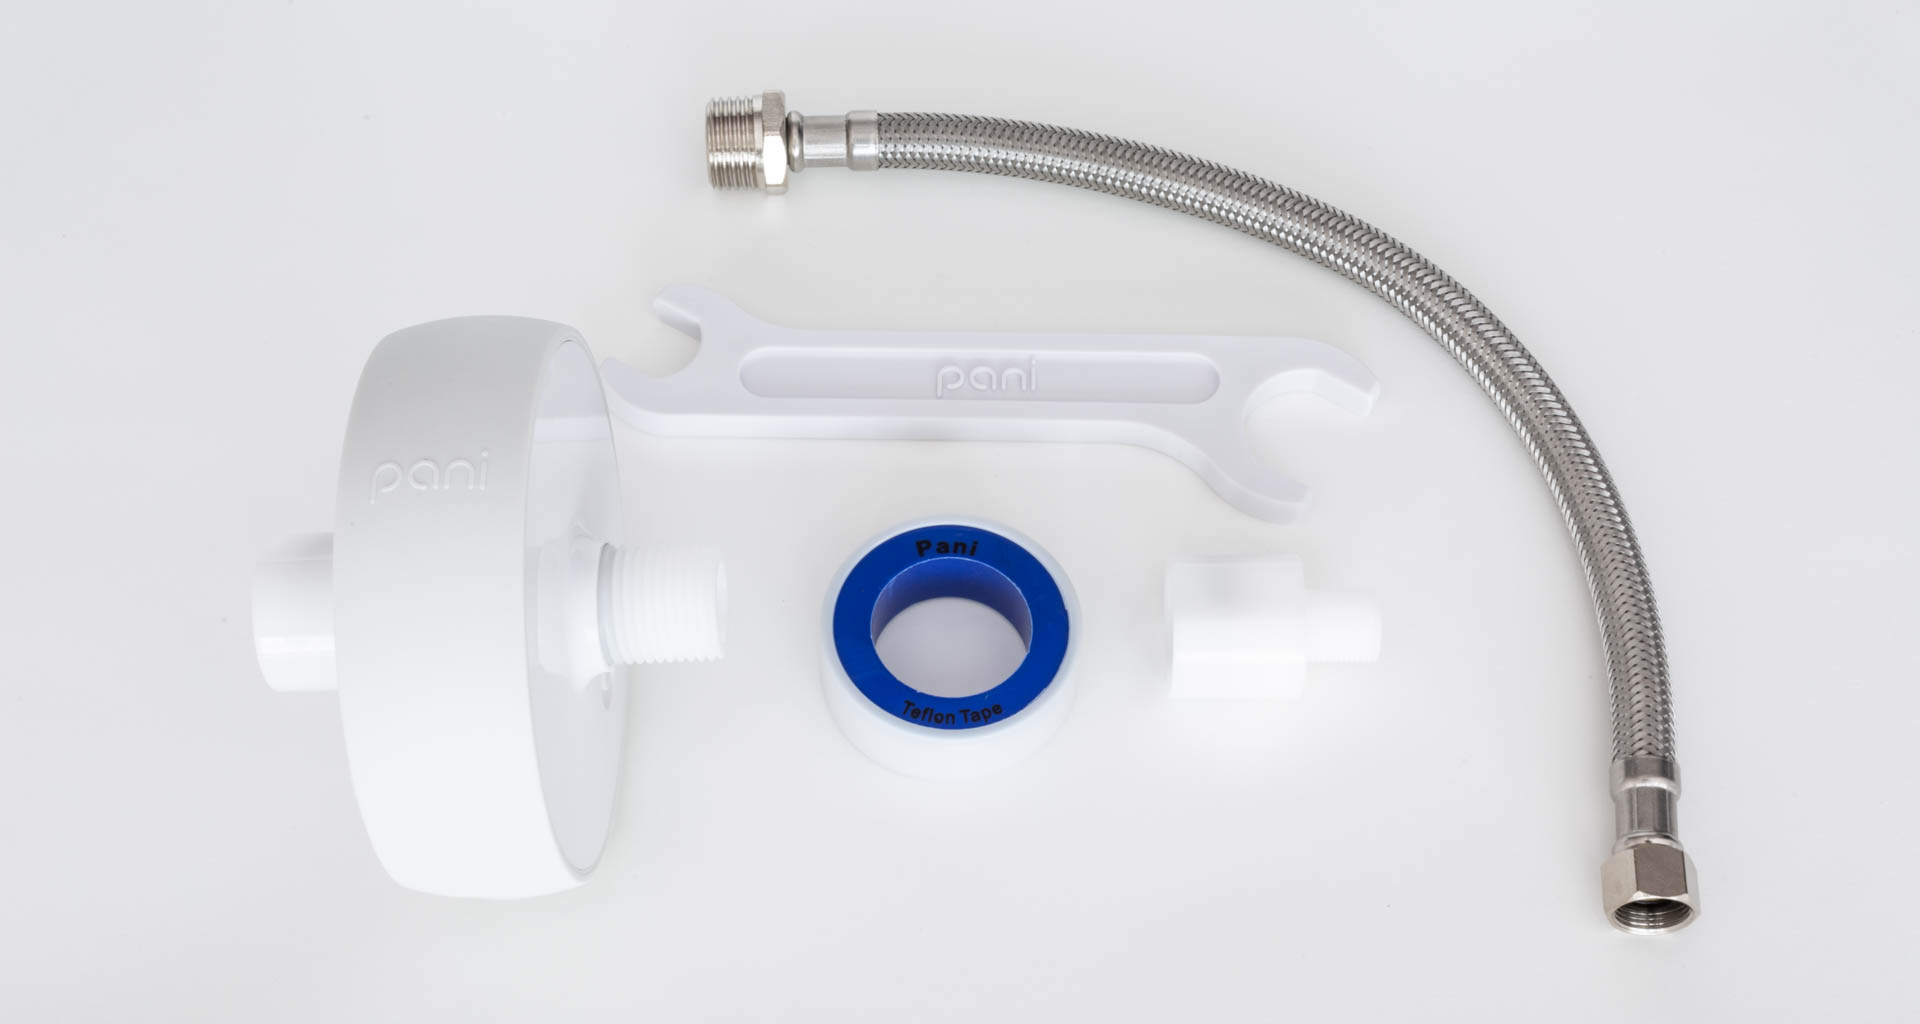 A Pani kit includes everything you need to install the smart water monitor on a single appliance, including the monitor device, braided stainless steel water line, hose adapter, Teflon tape, and a Pani-branded wrench. Image: Digitized House.